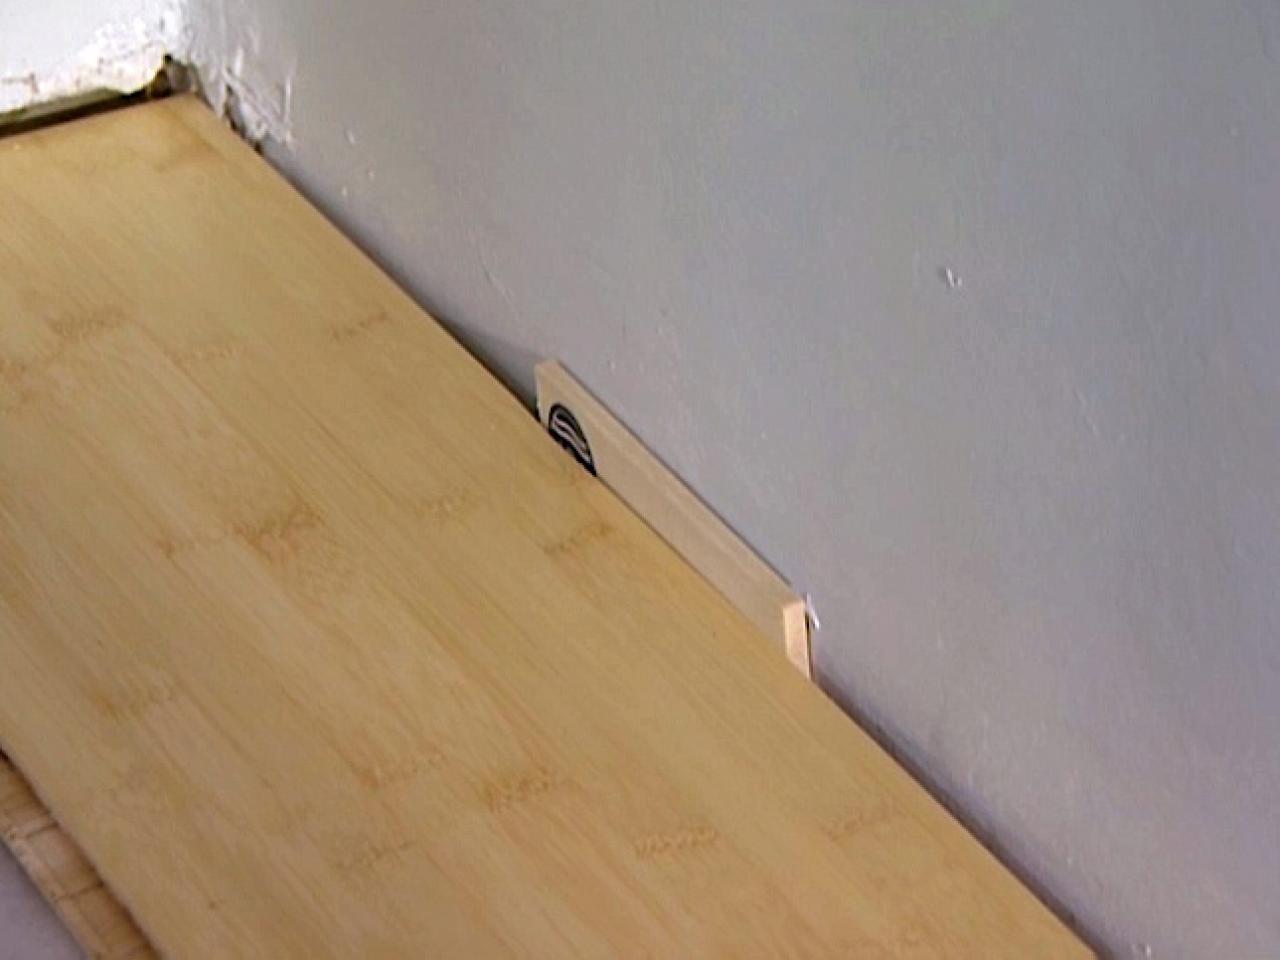 Installing Laminate Flooring, How To Use Spacers With Laminate Flooring